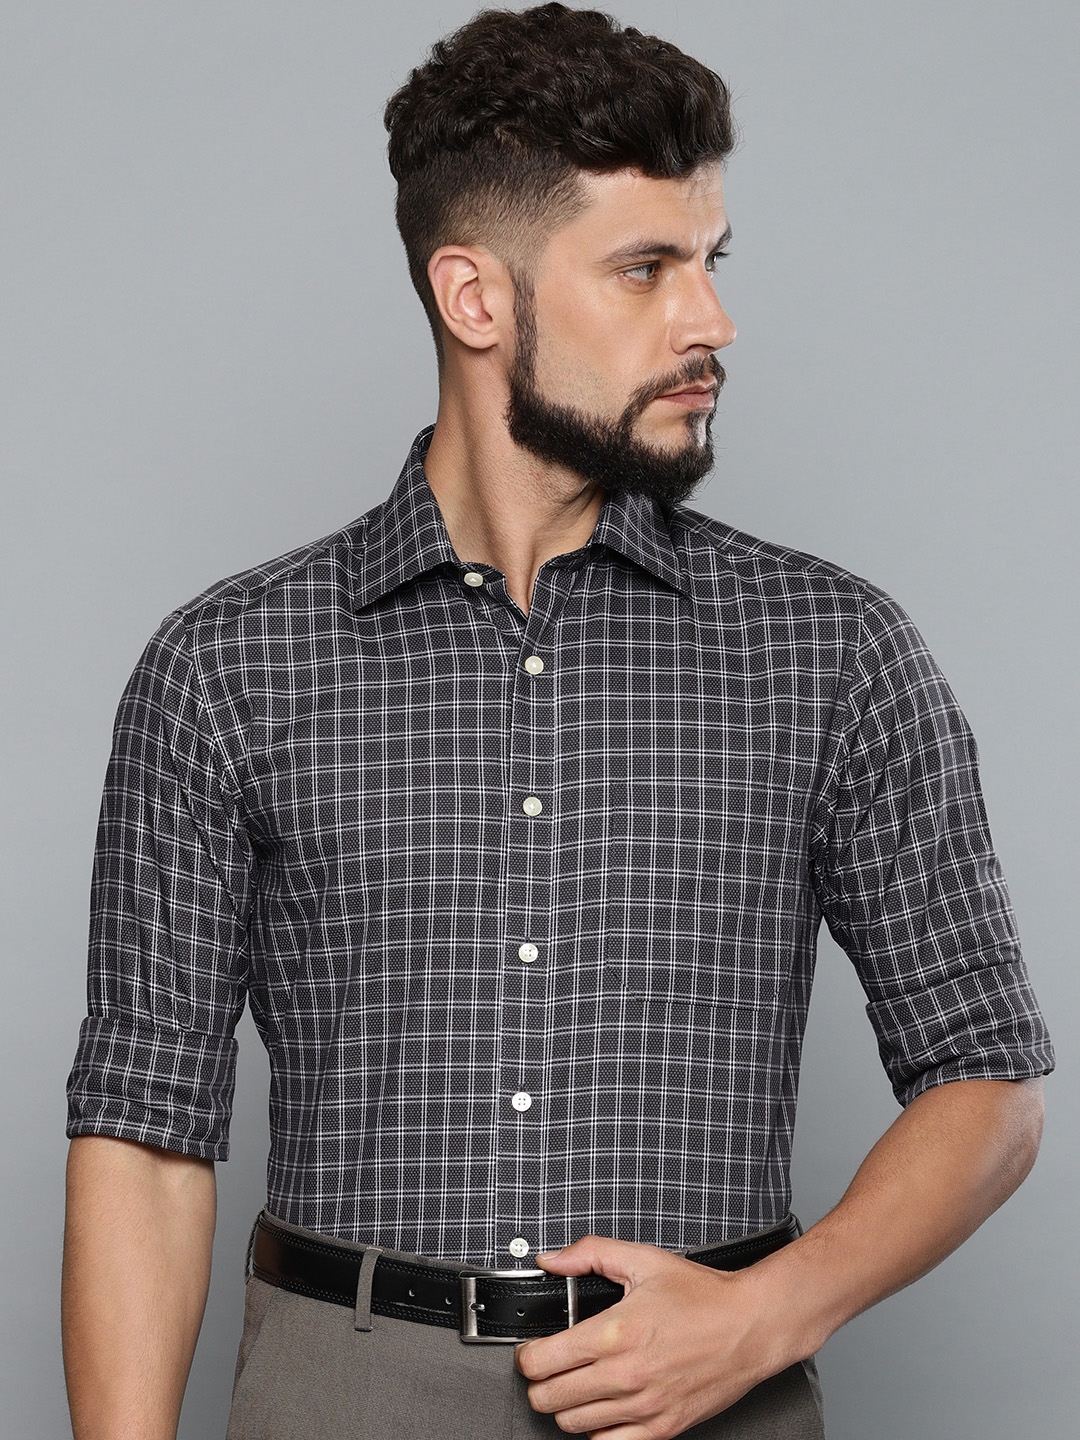 LOUIS PHILIPPE Men Checkered Formal Black, White Shirt - Buy LOUIS PHILIPPE  Men Checkered Formal Black, White Shirt Online at Best Prices in India